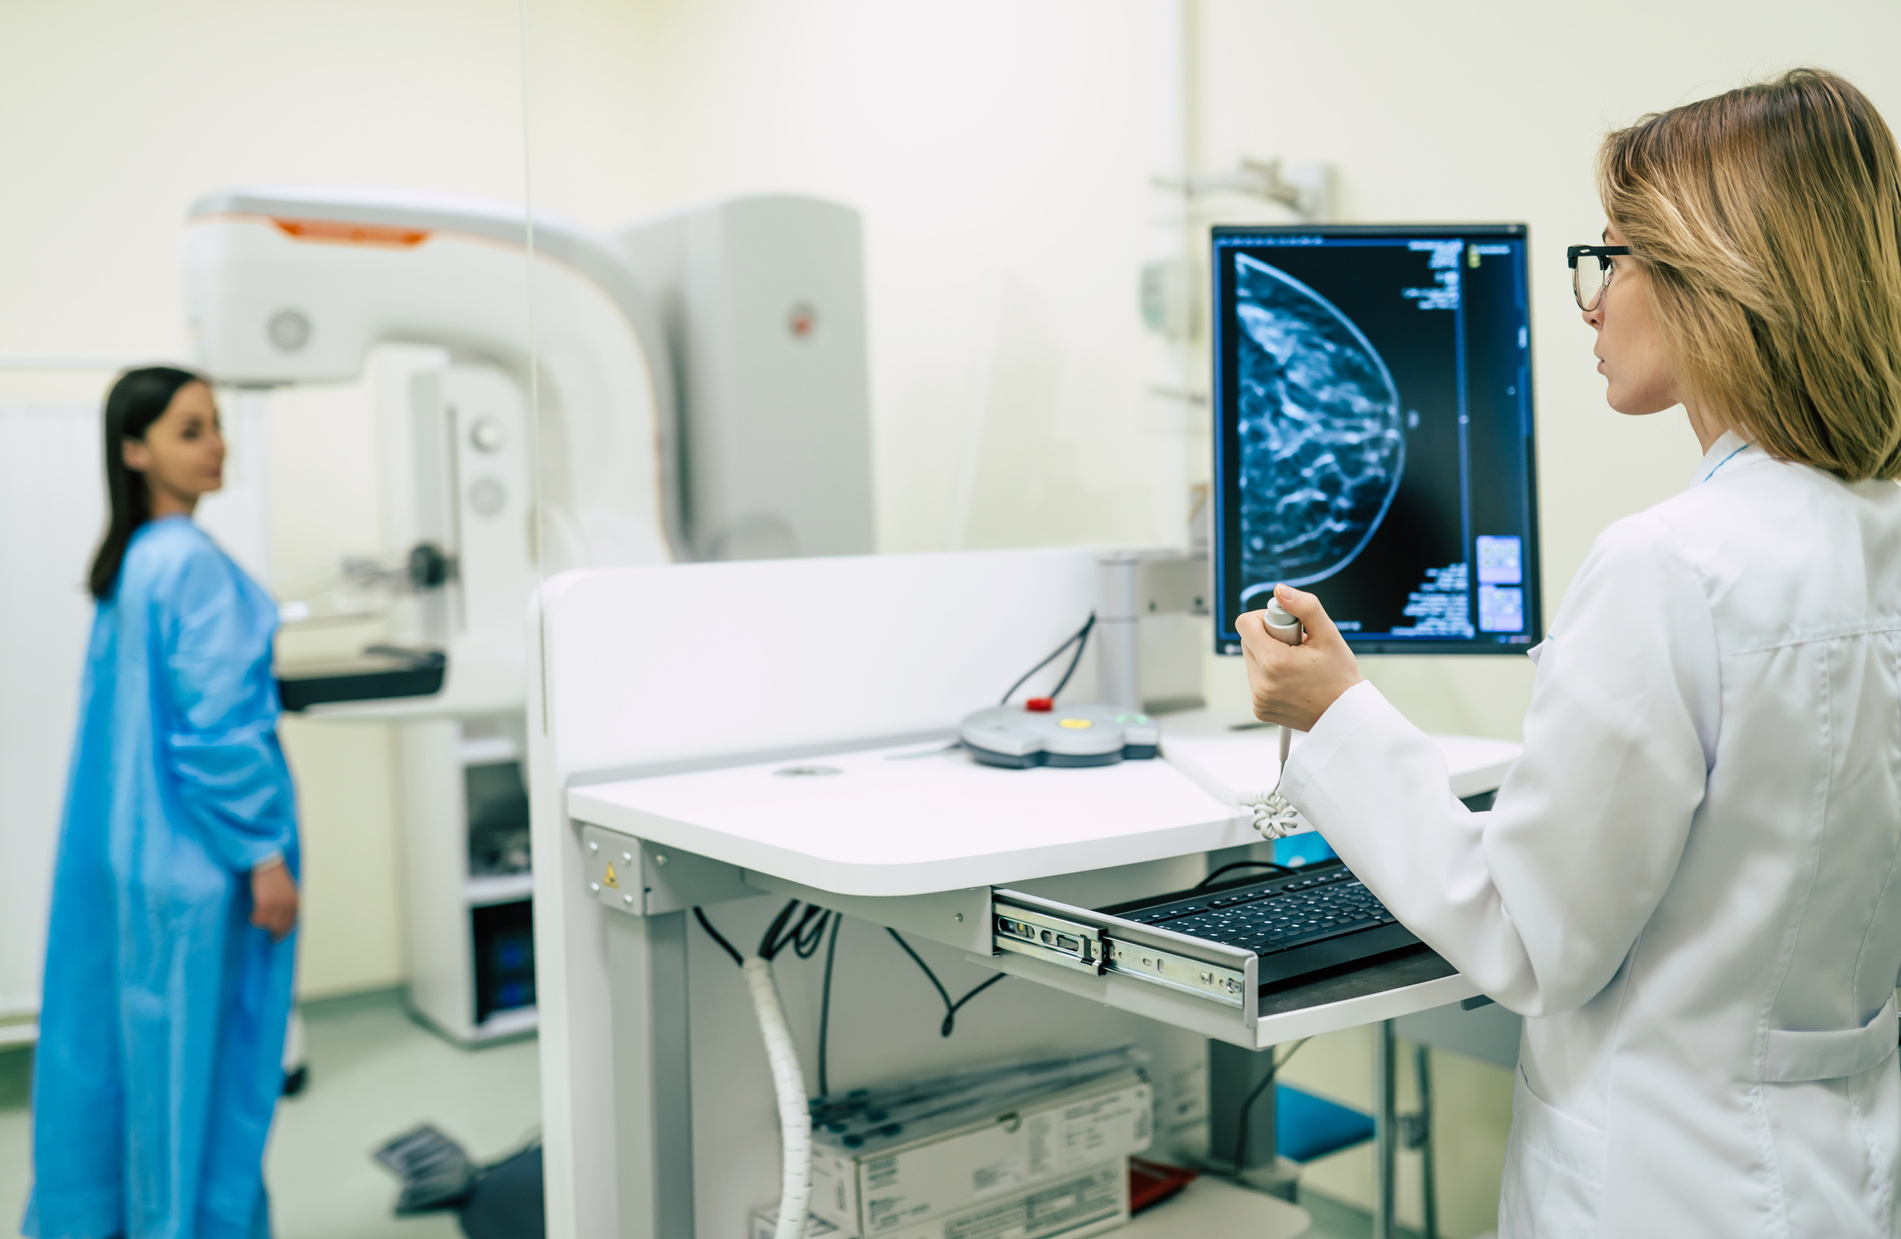 Young woman is having mammography examination at the hospital or